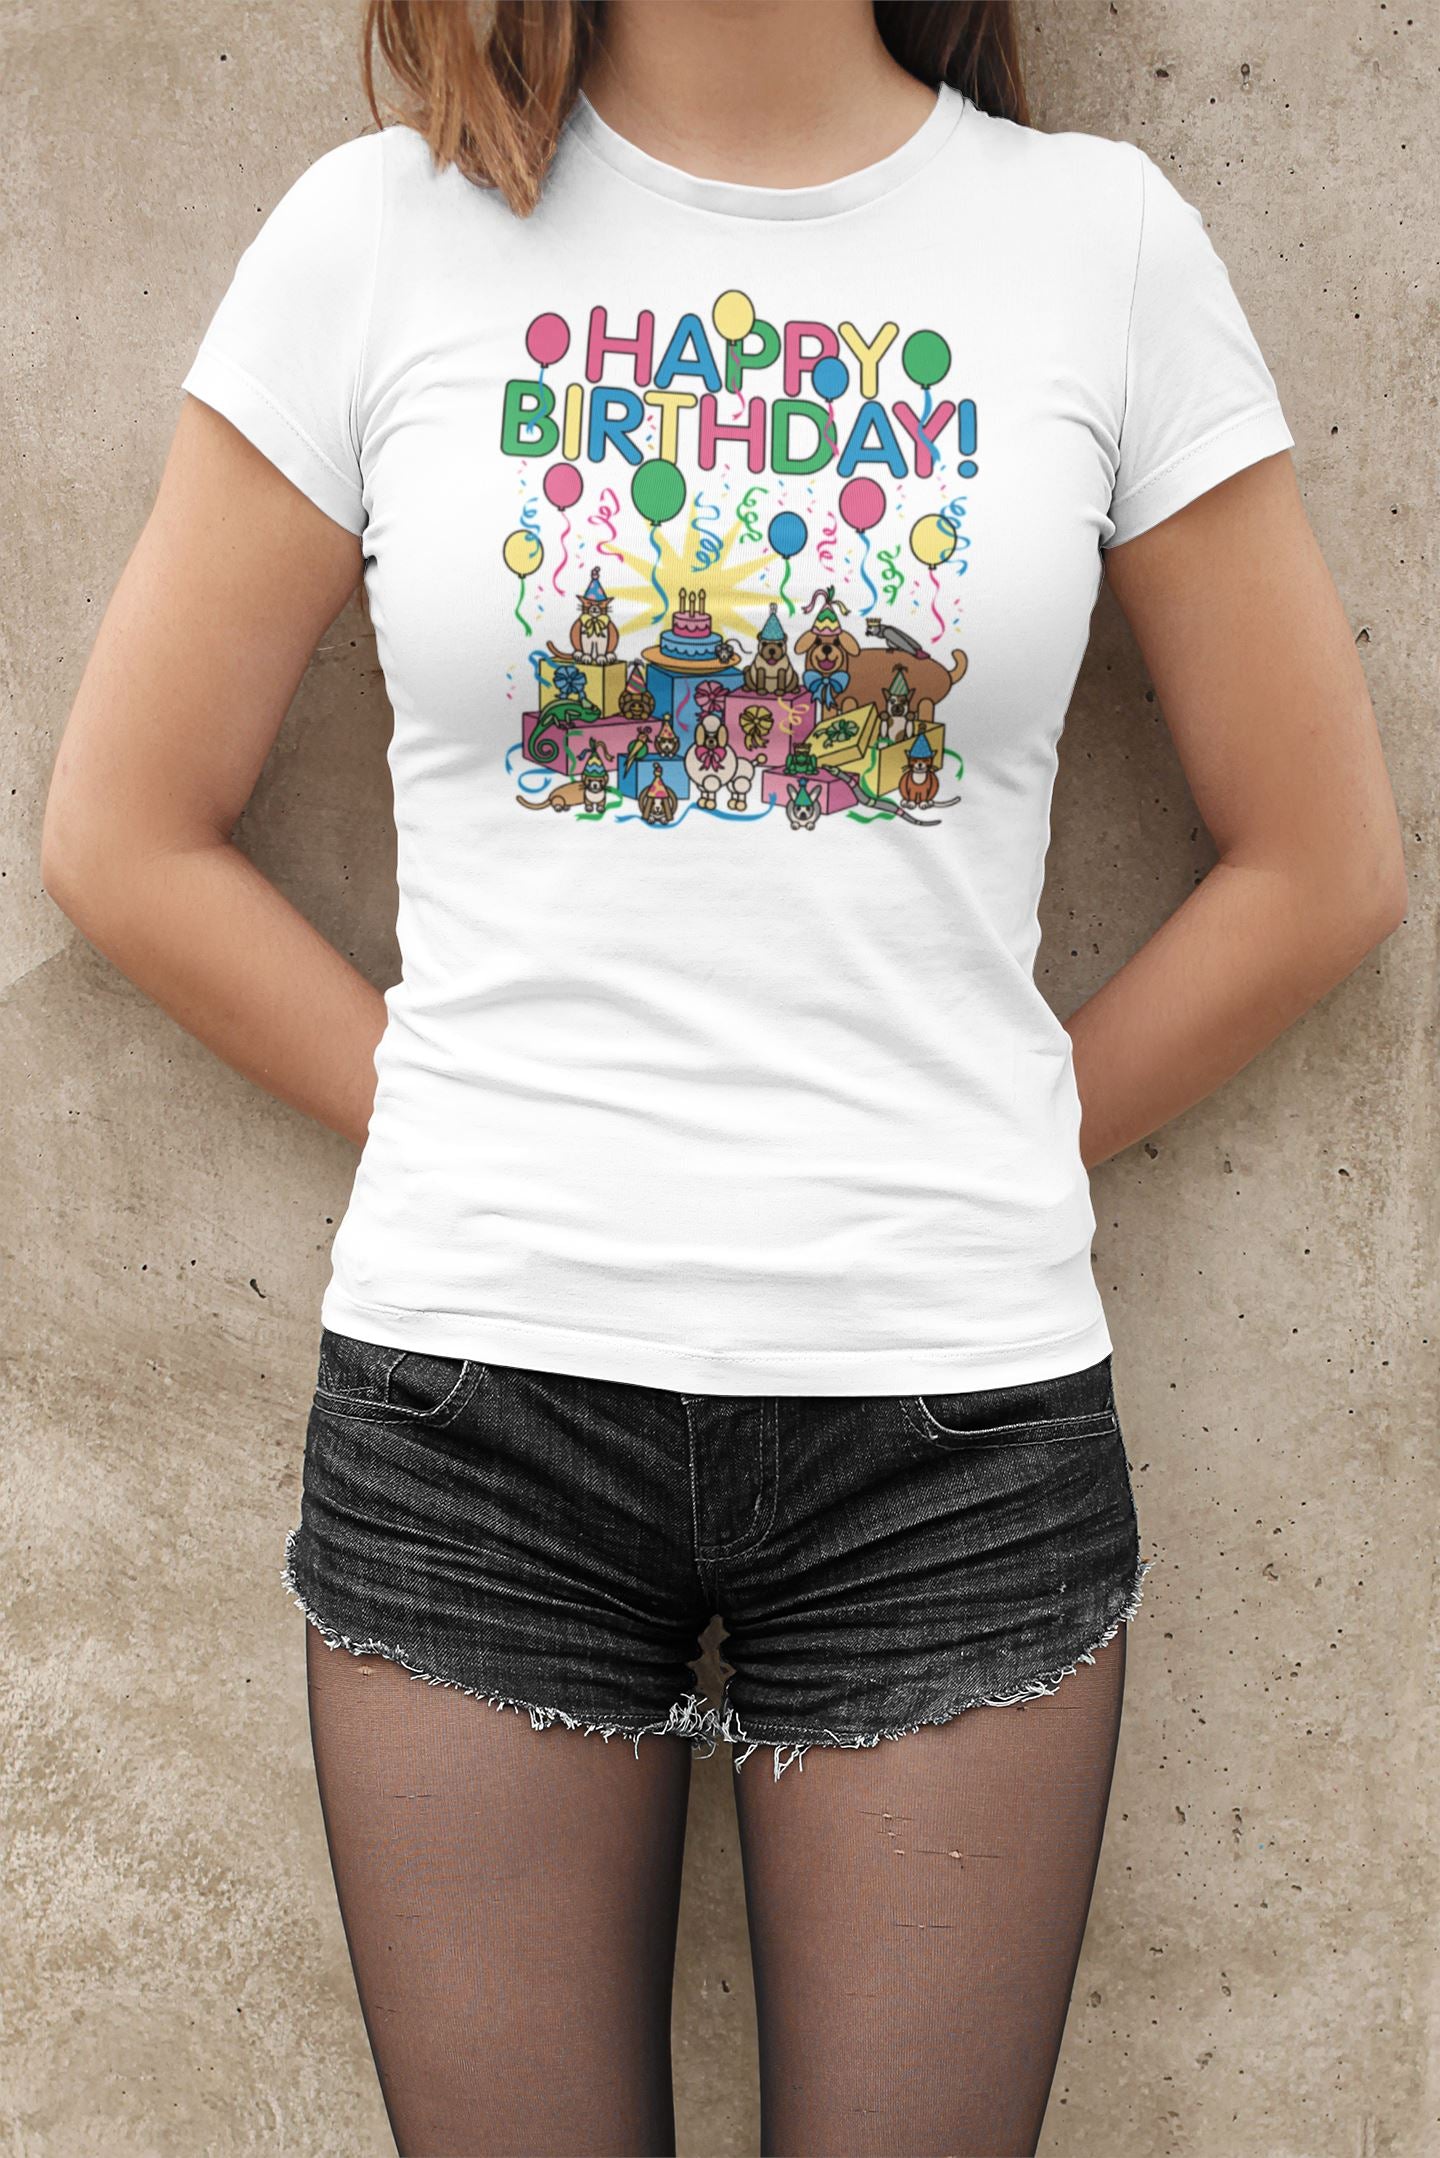 Happy Birthday Special Birthday T Shirt for Parents for Children's Birthday freeshipping - Catch My Drift India